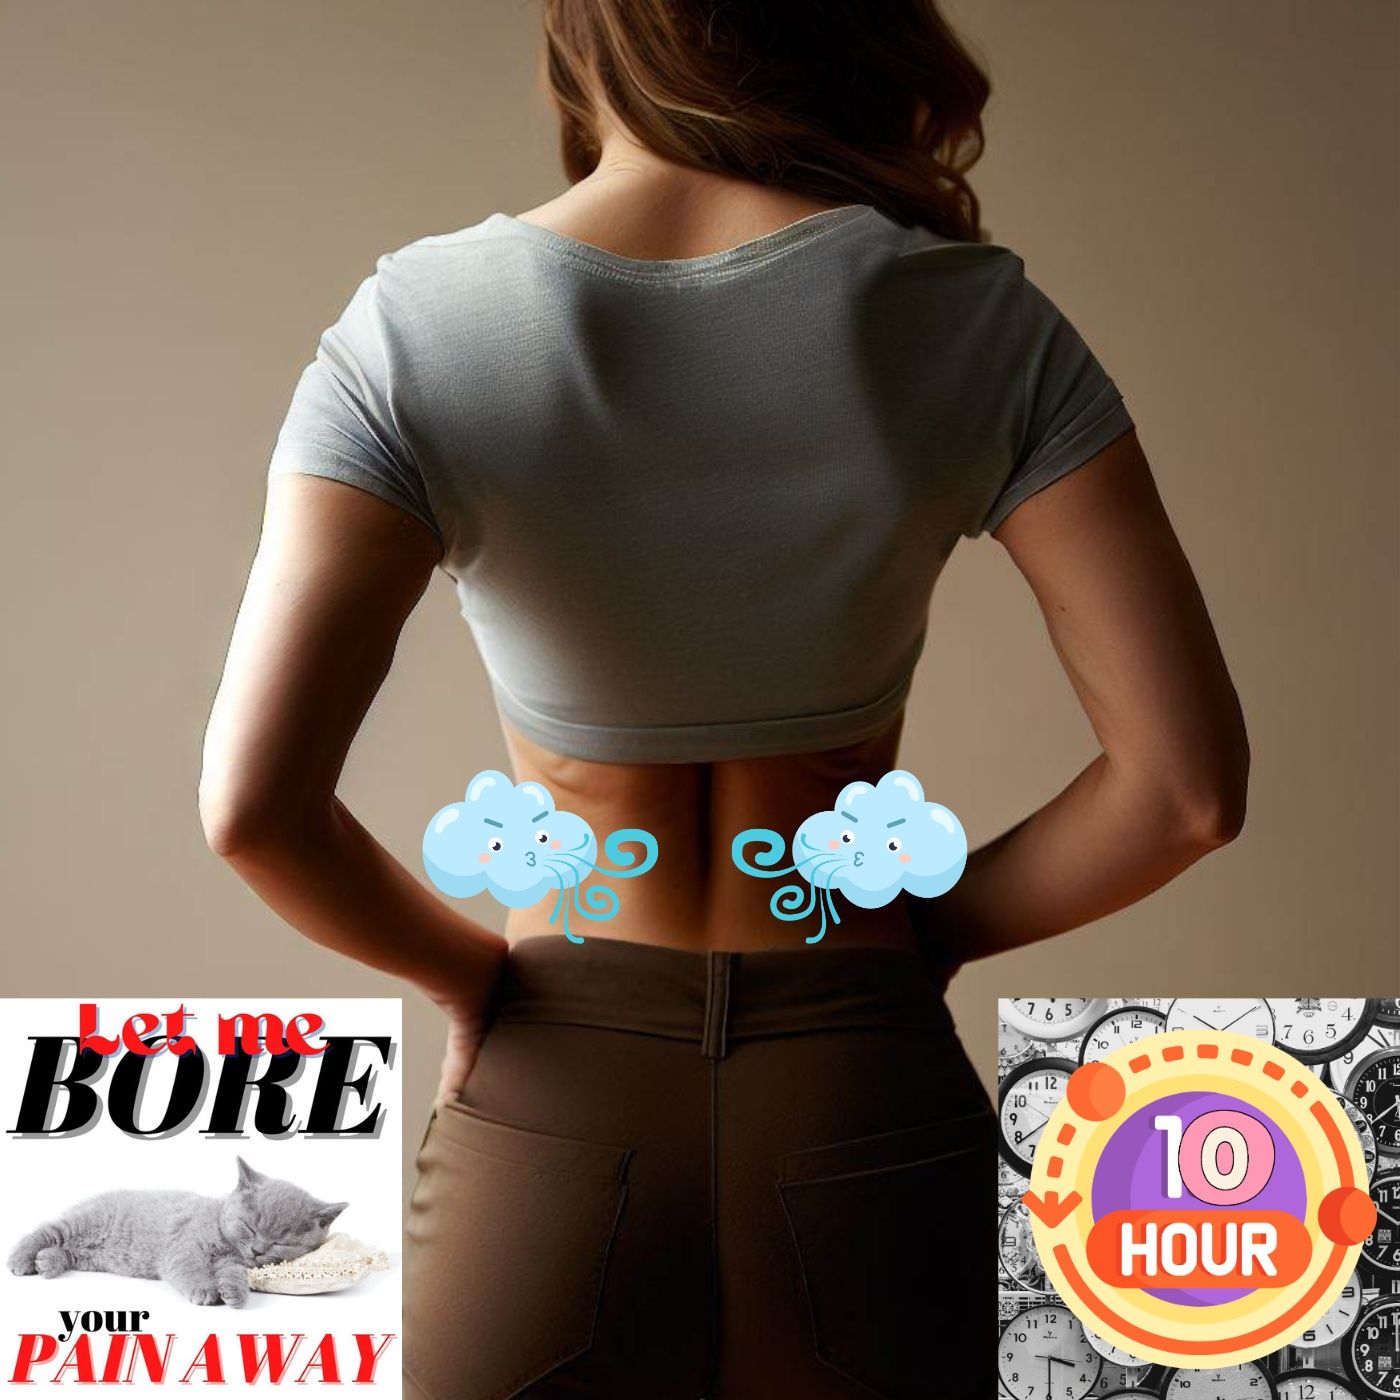 (10 hours) #7 Lower back - Let me bore your PAIN AWAY